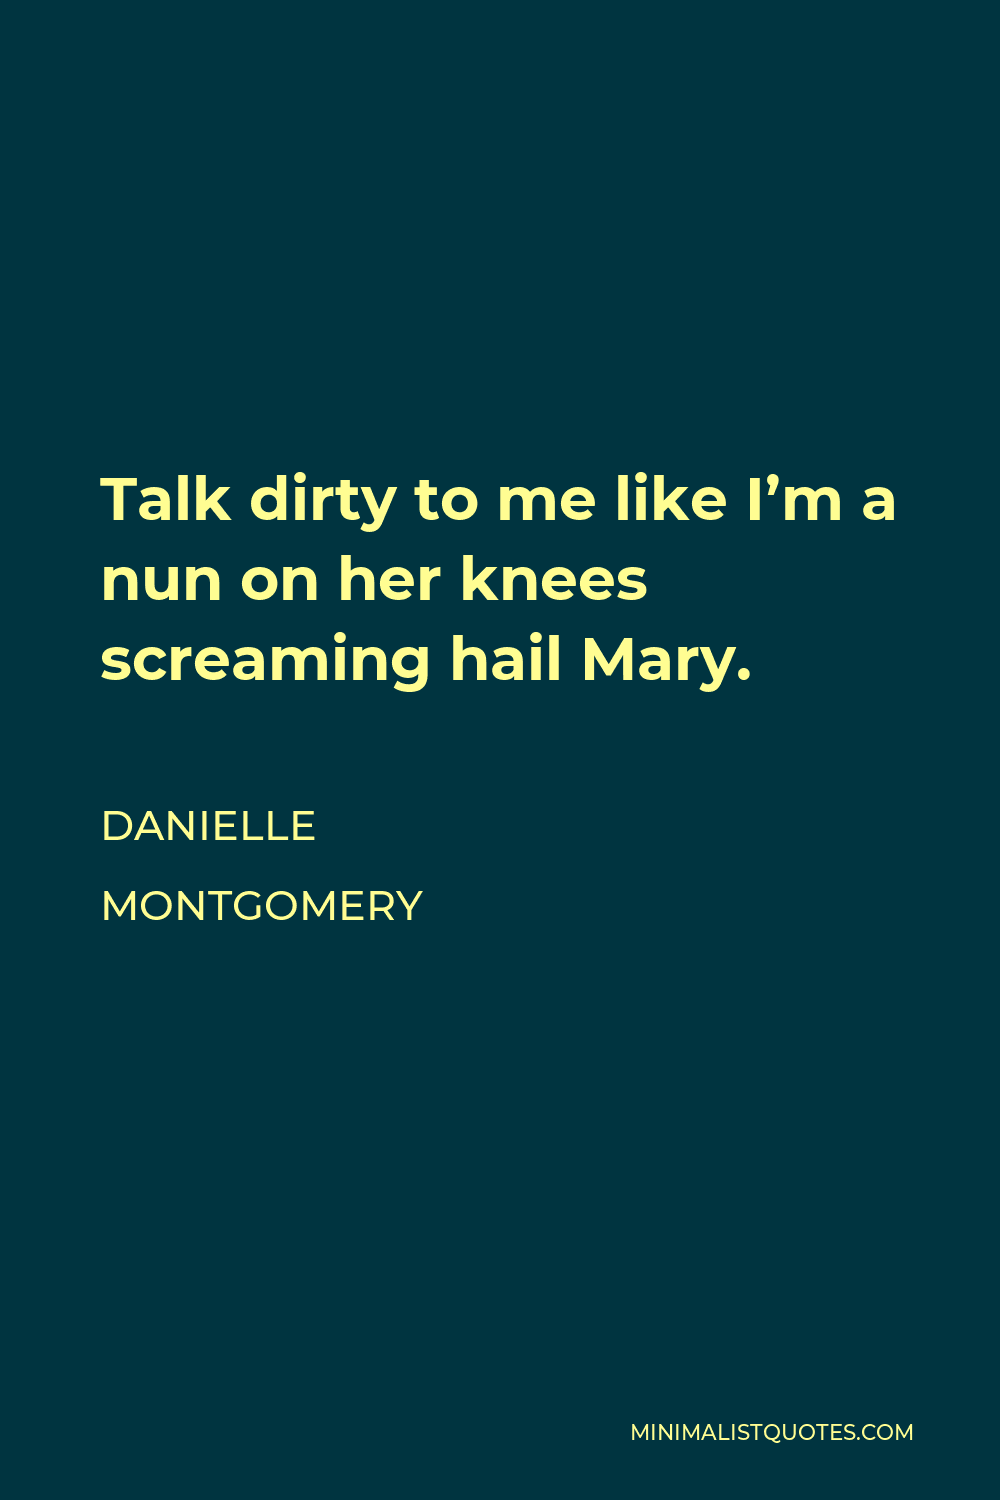 Danielle Montgomery Quote: Talk dirty to me like I'm a nun on her knees  screaming hail Mary.